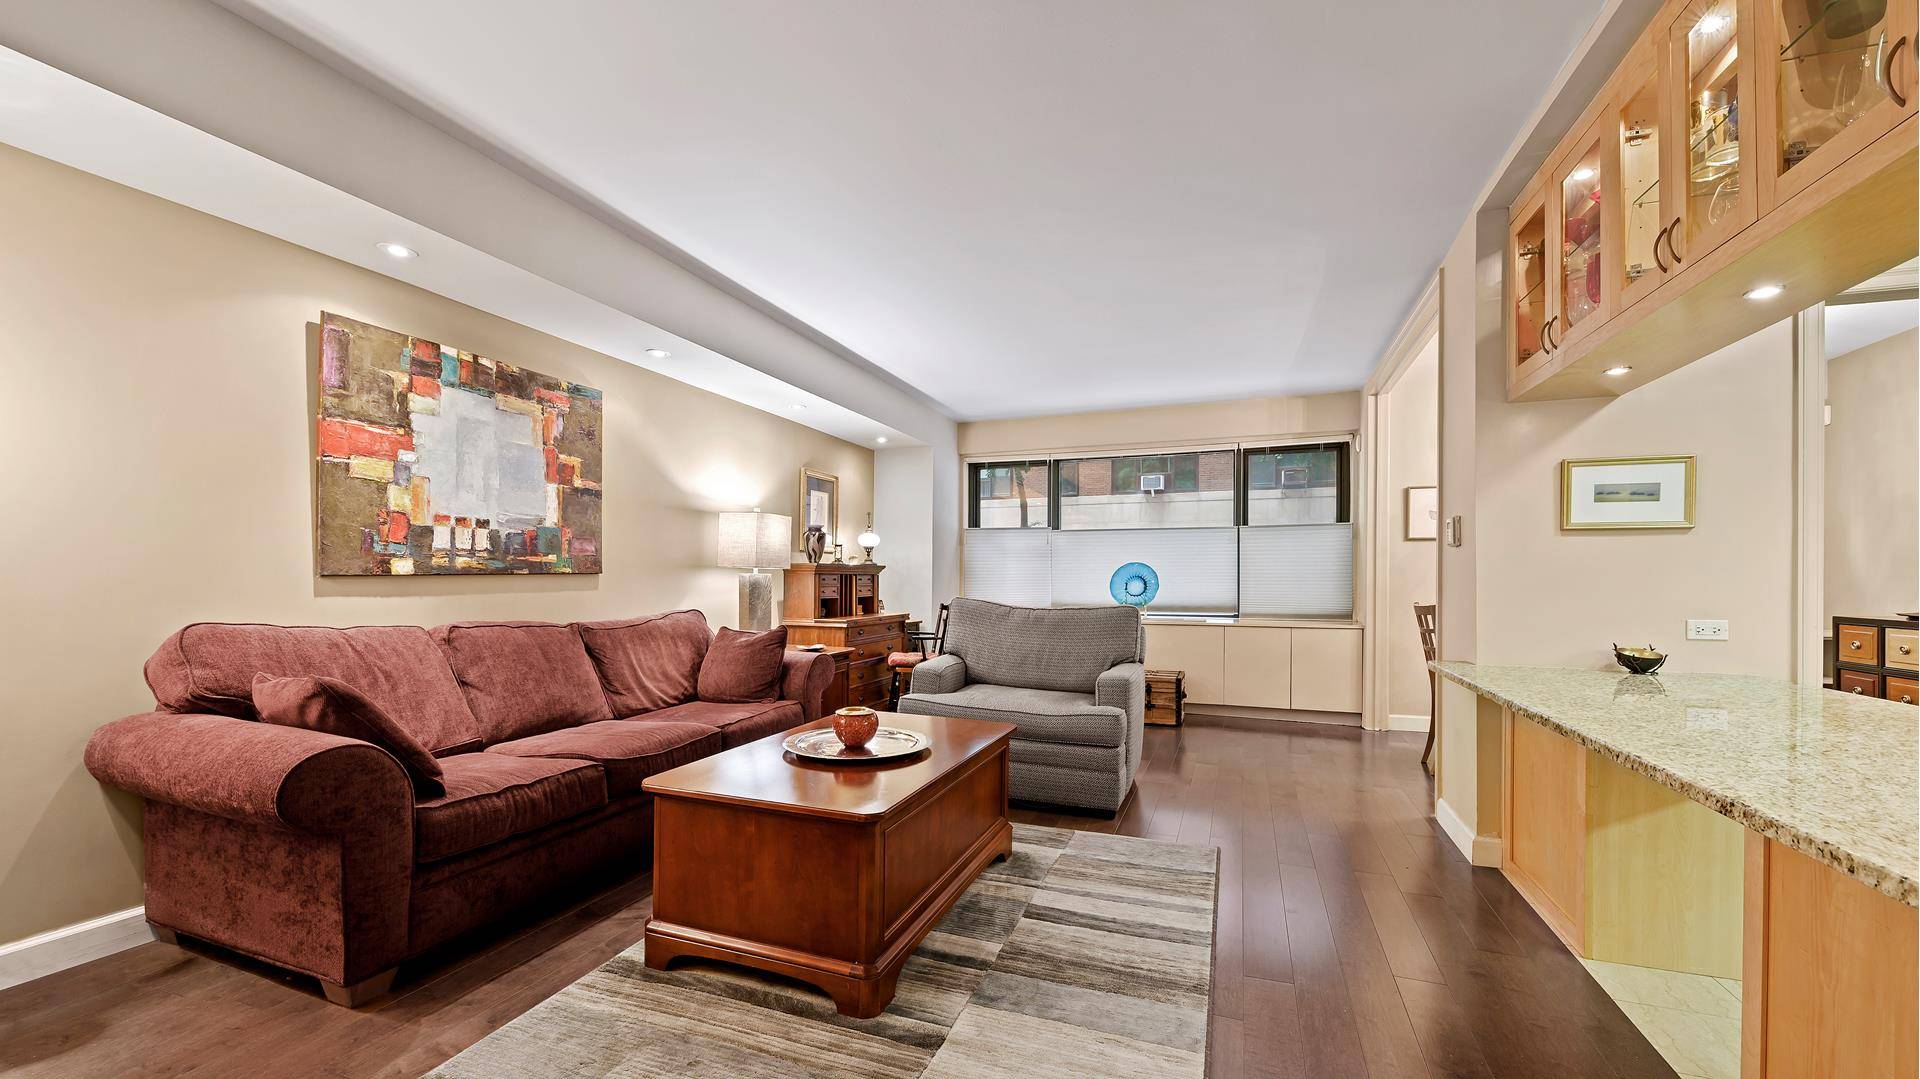 Move right into this beautiful, exceptionally large 1 bedroom, 1.